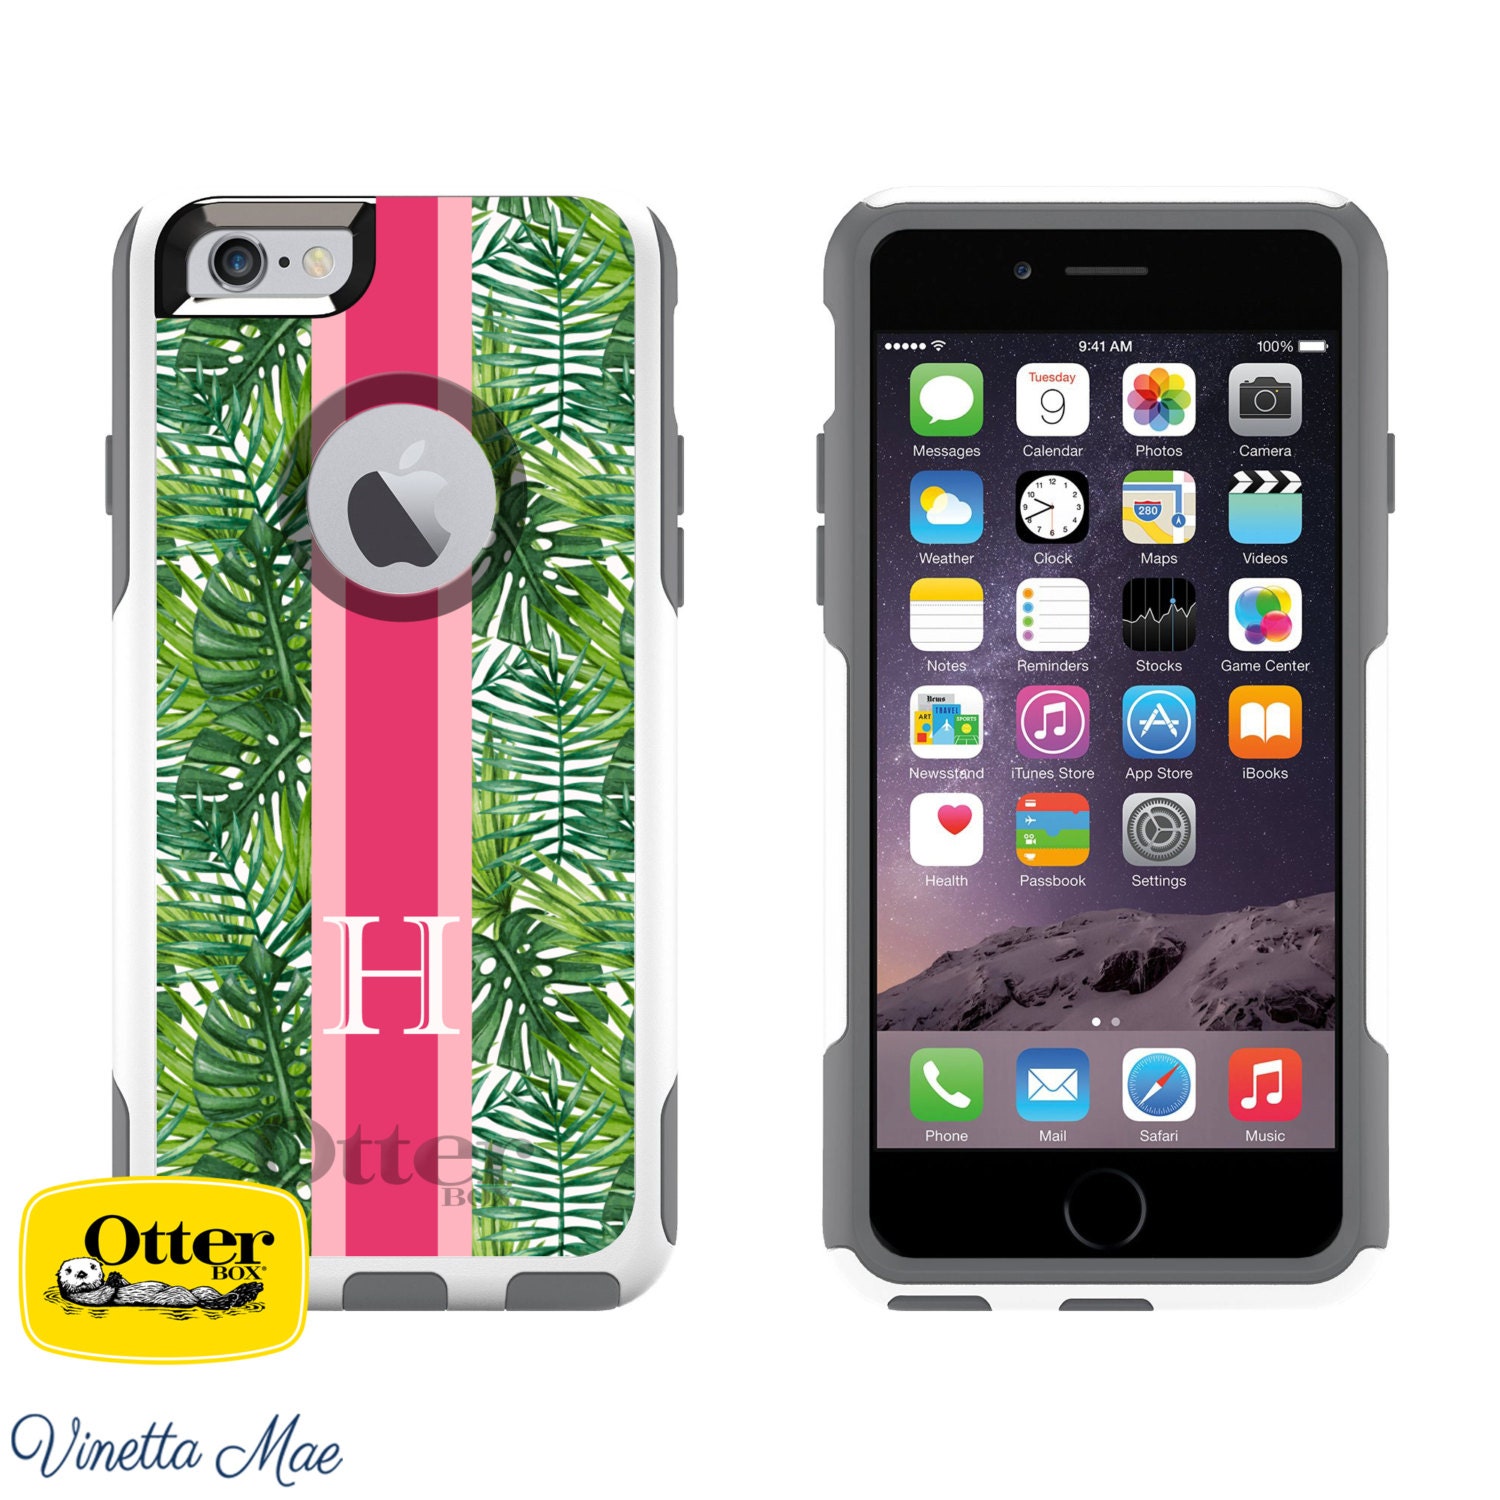 iPhone Otterbox Commuter Series Case for iPhone 5/5s/SE 6/6s